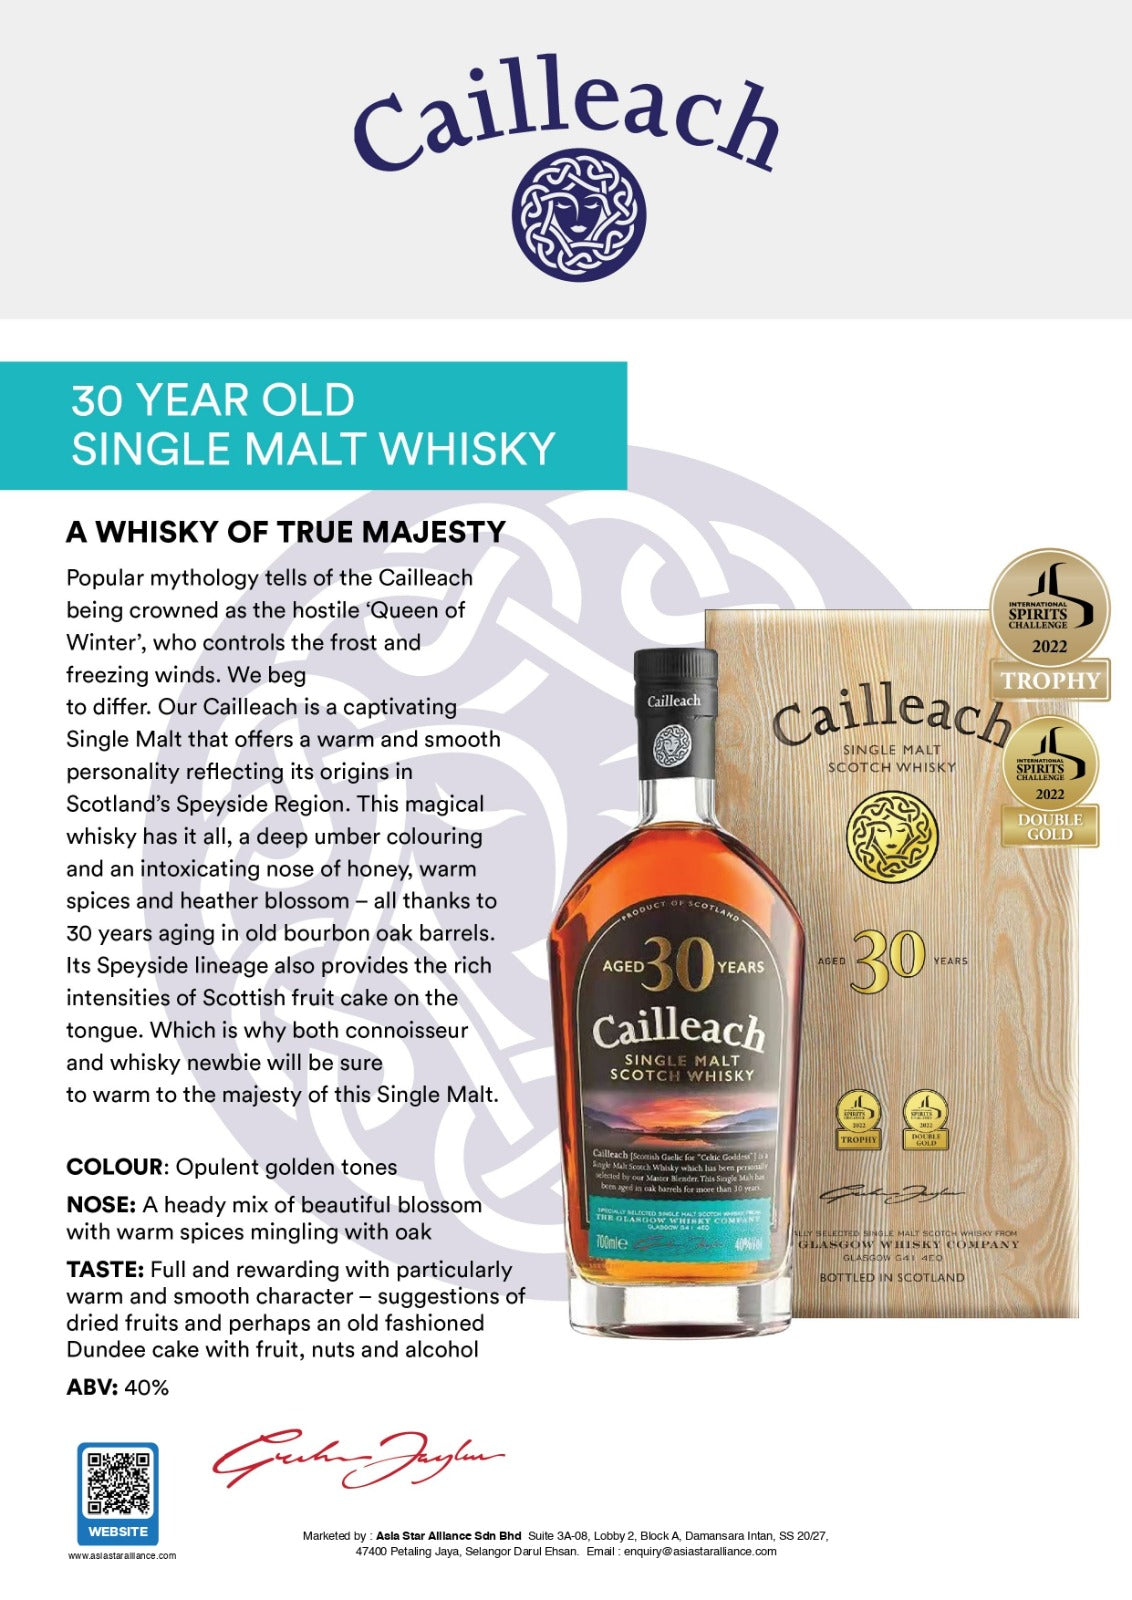 Cailleach Single Malt Scotch Whisky 30 Years Old With Wooden Box [700ml]